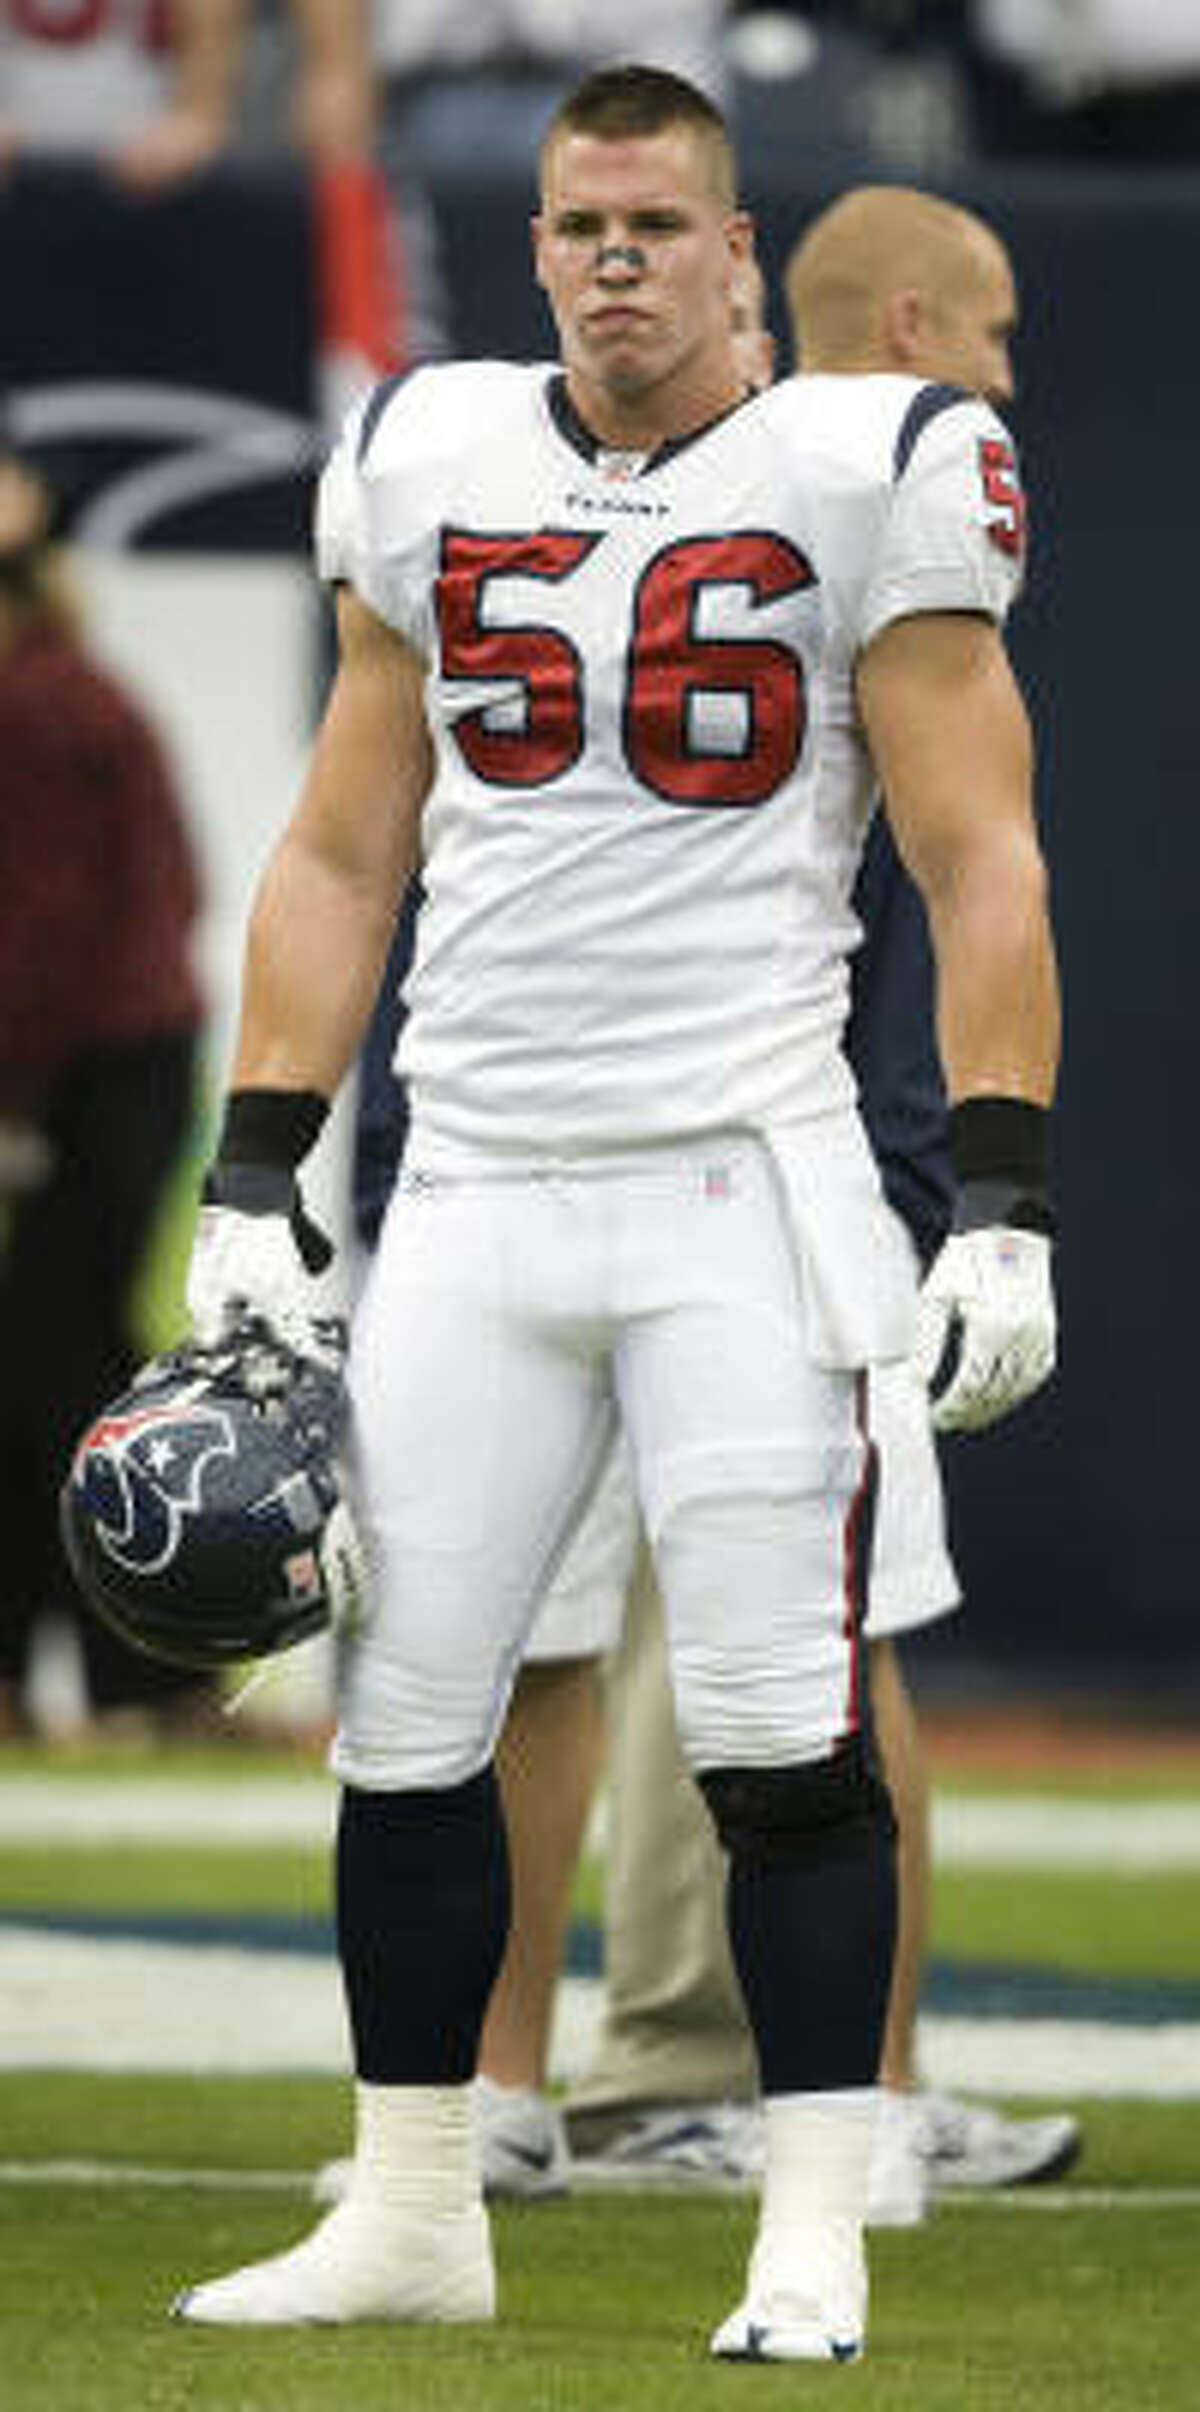 Brian Cushing has been the subject of steroid rumors since his high school days in New Jersey.